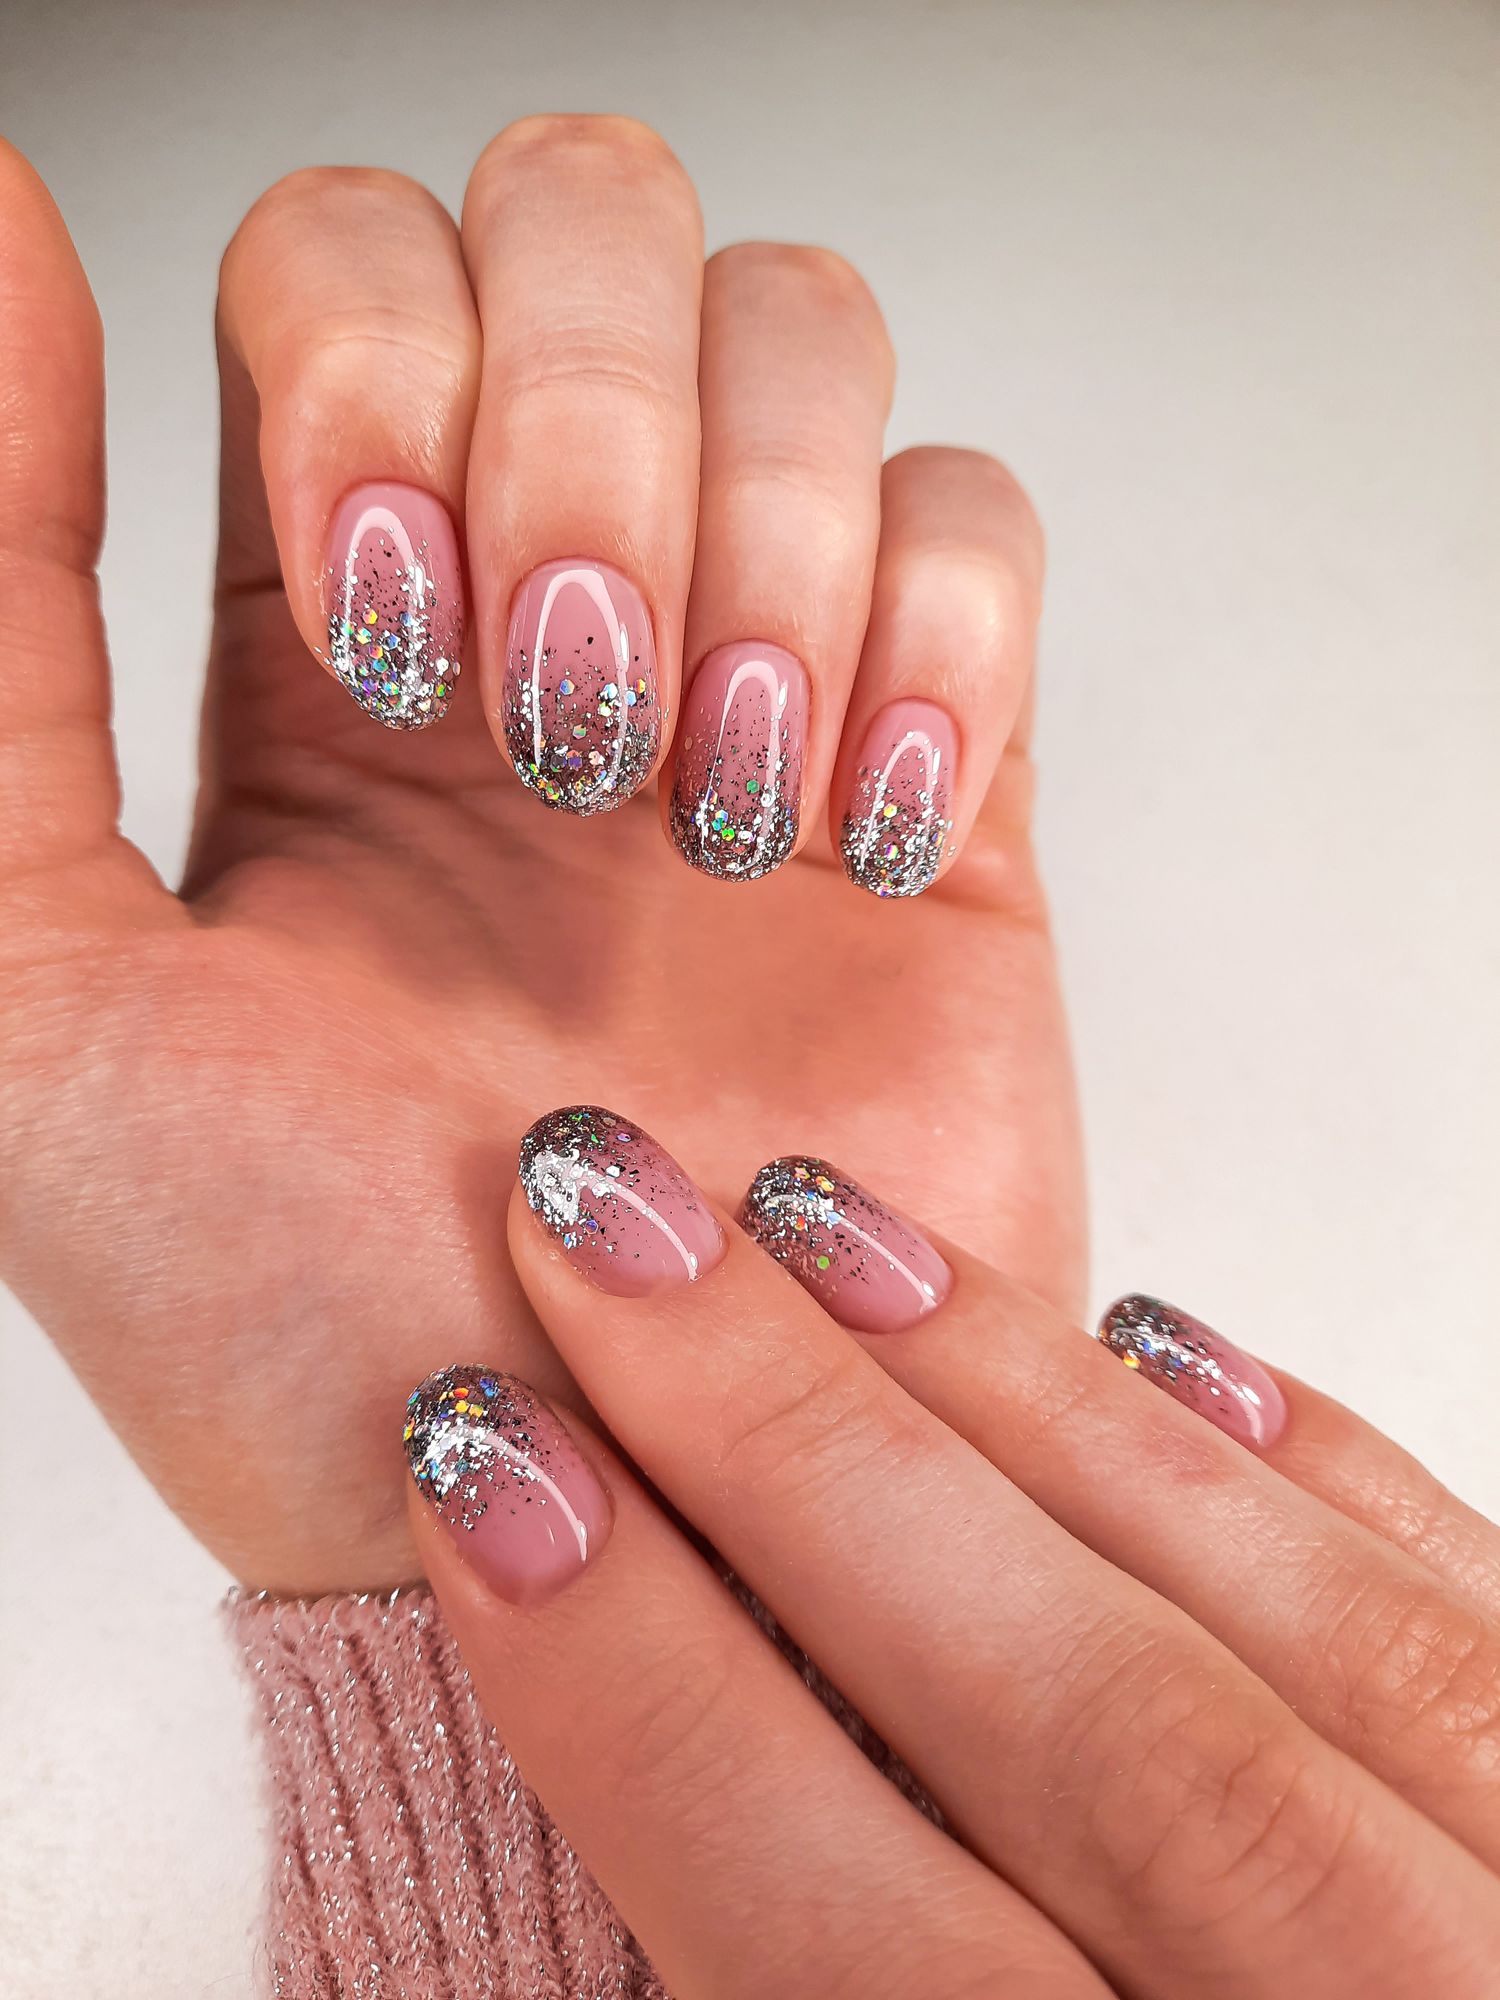 35 Christmas Nail Art Designs That Are Extra Festive